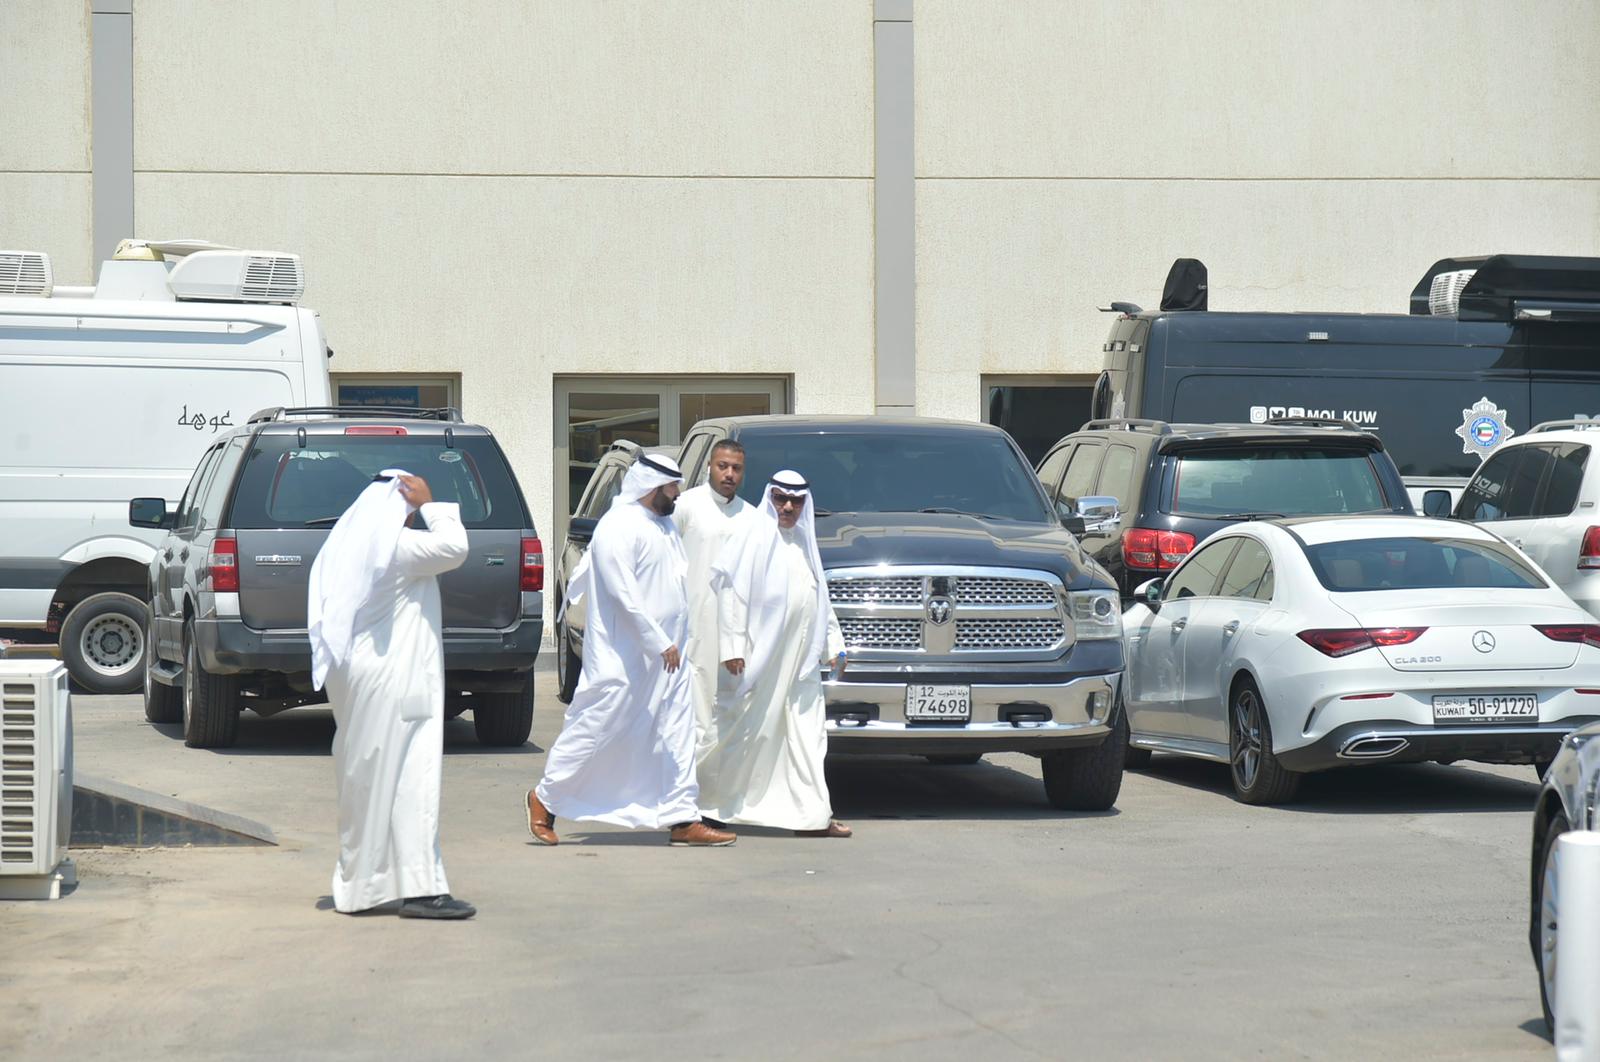 KUWAIT: Former MP Marzouq Al-Khalifa (right) is escorted after he turned himself in after submitting his papers to run for parliament on August 30, 2022. -- Photo by Yasser Al-Zayyat